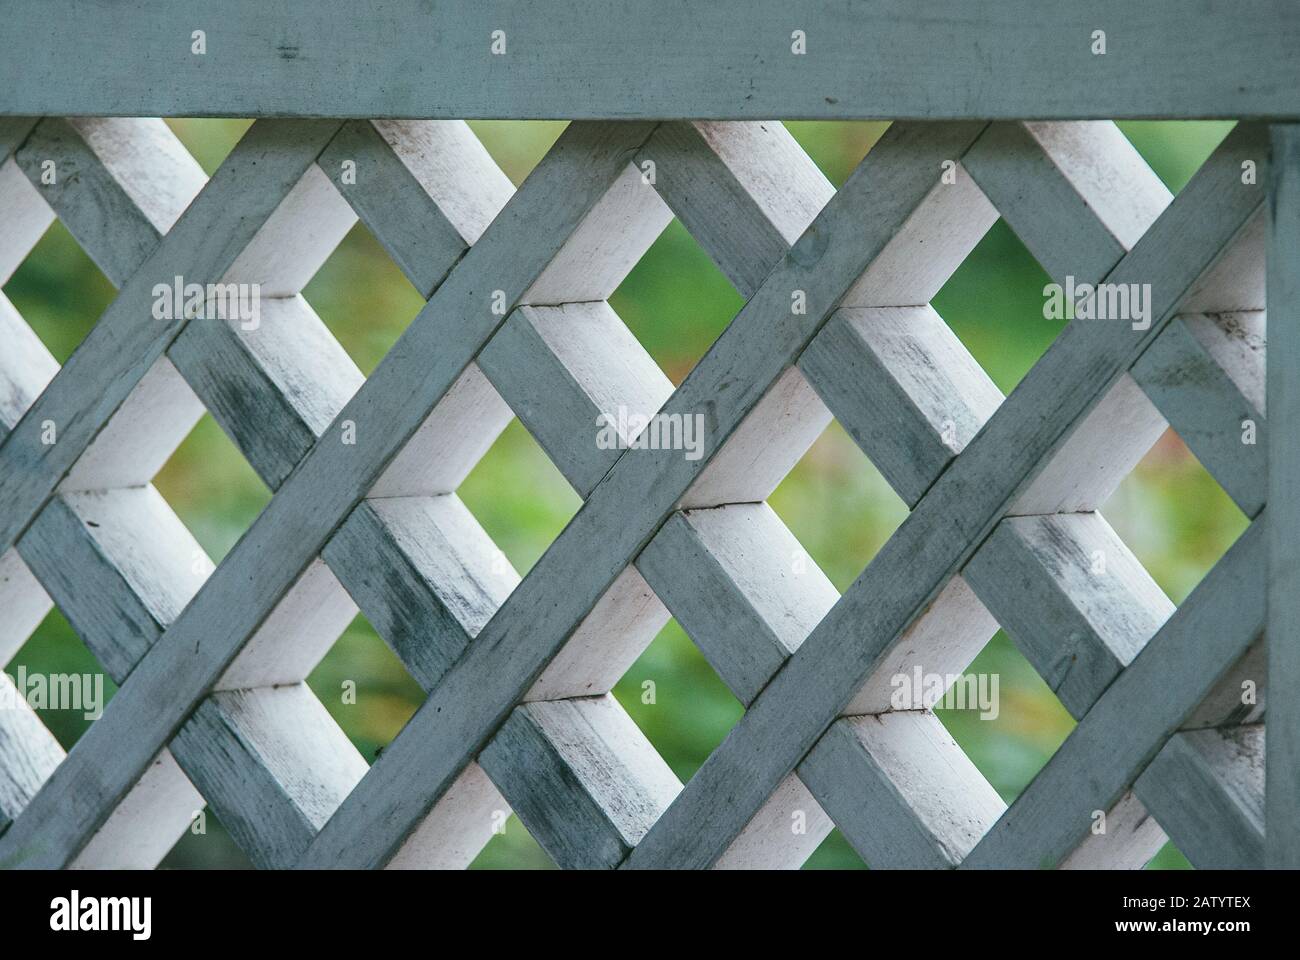 diamond-shaped wooden lattice painted white against the background of a green lawn Stock Photo